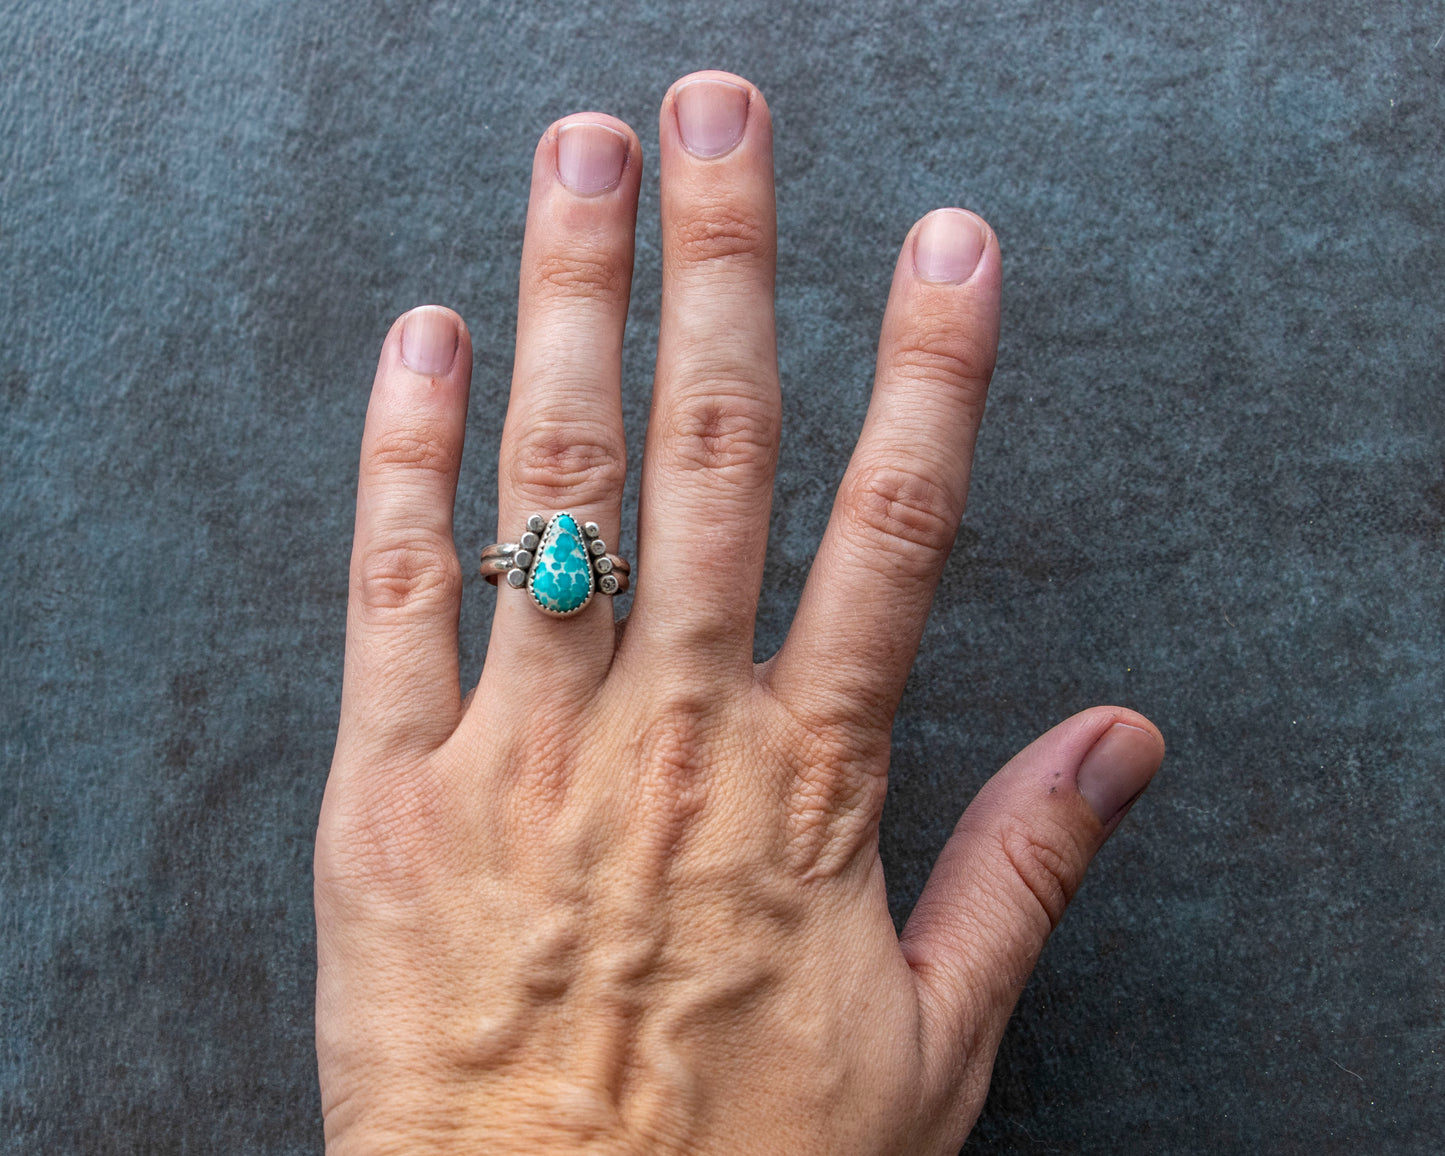 White Water Armored Turquoise Ring Size 8.5